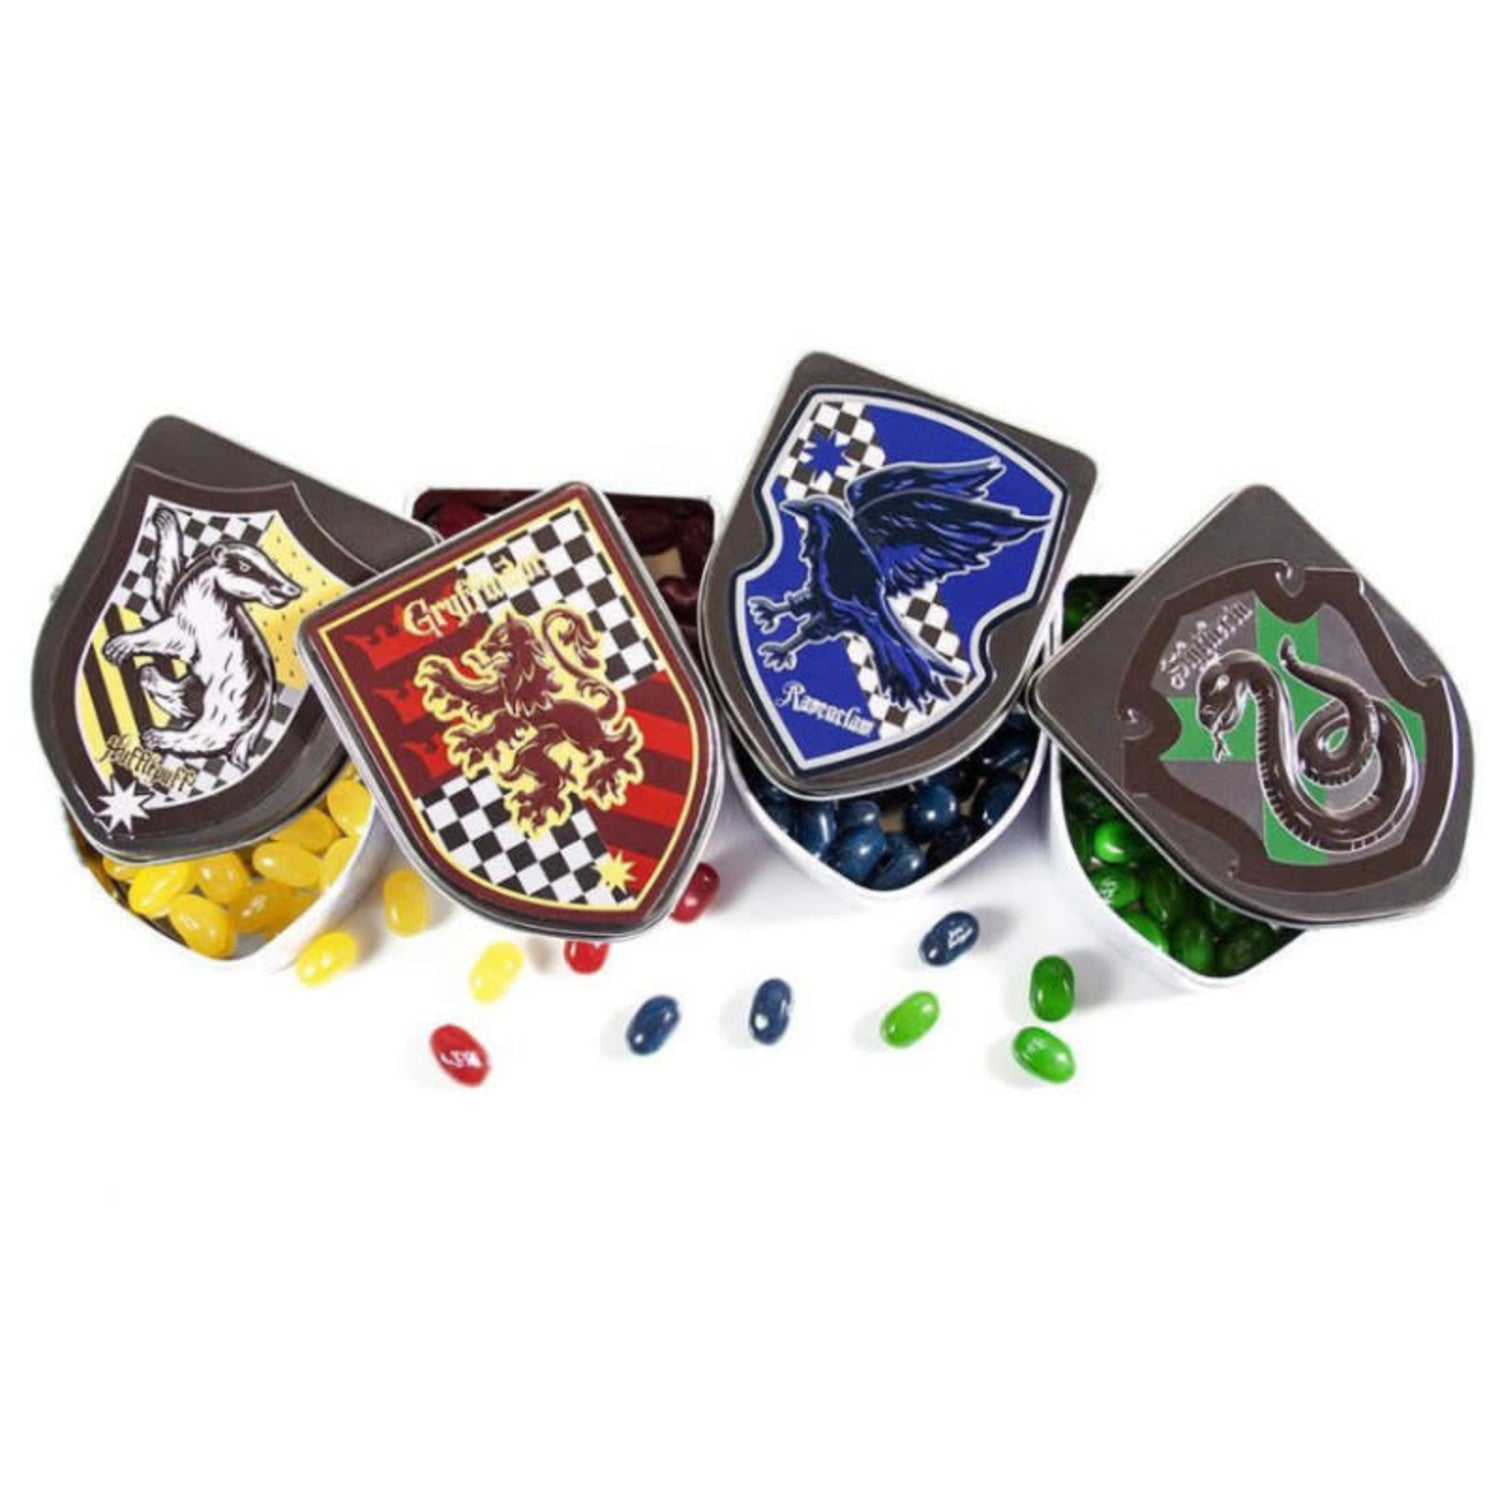 Hogwarts house club candies in tin cans